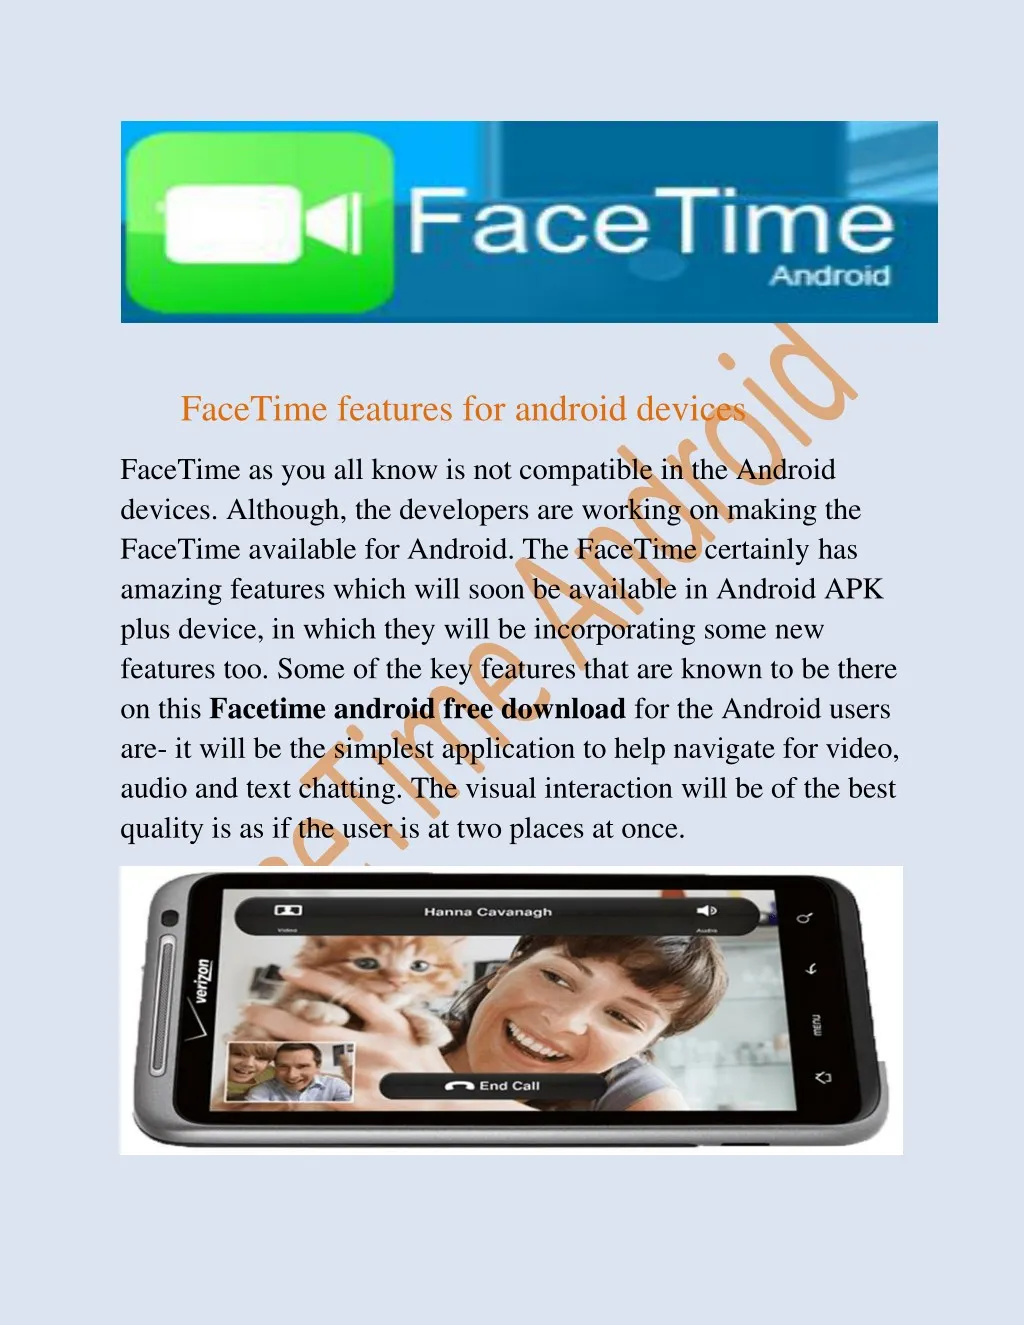 facetime features for android devices